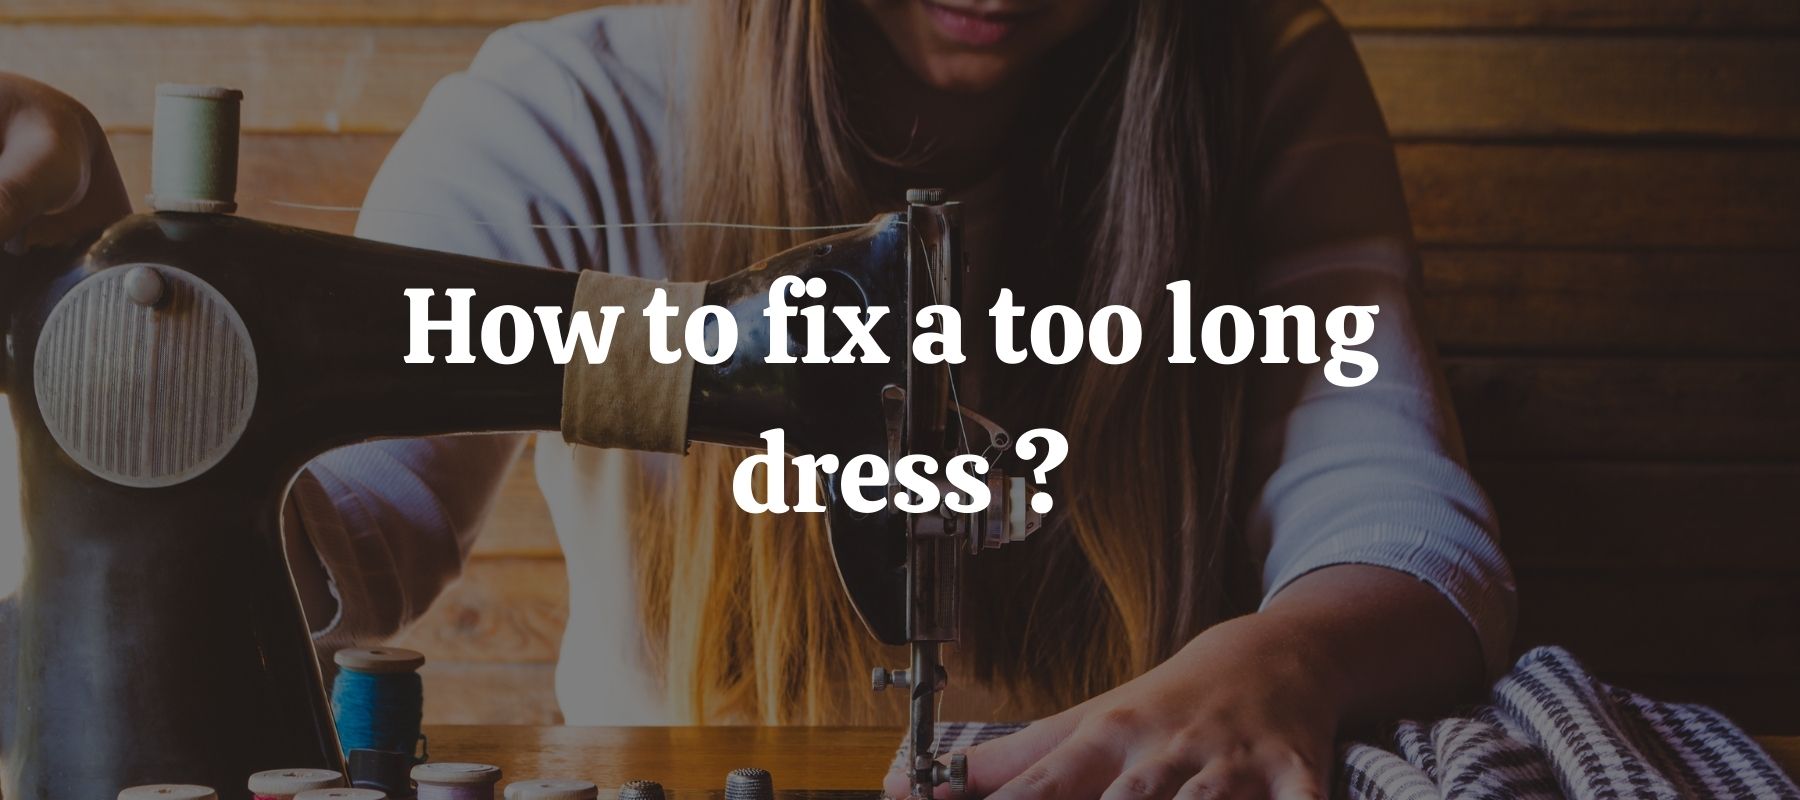 How to fix a too long dress